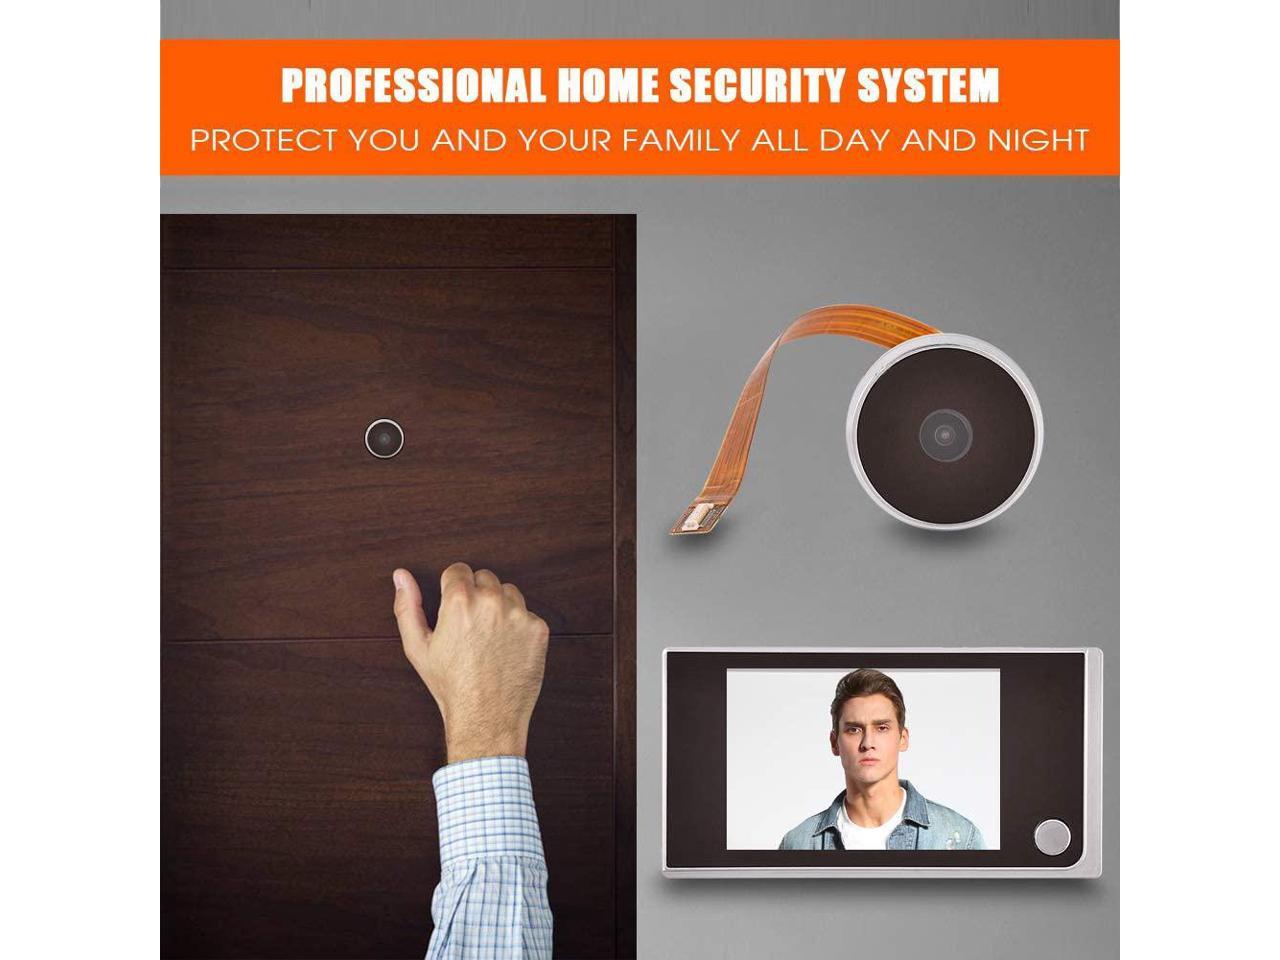 120 ° Visual Video Digital Doorbell,with LCD Inside Screen,Professional Home Security System Bewinner Mini HD Video Doorbell,3.5 Inch LCD Screen Peephole Camera